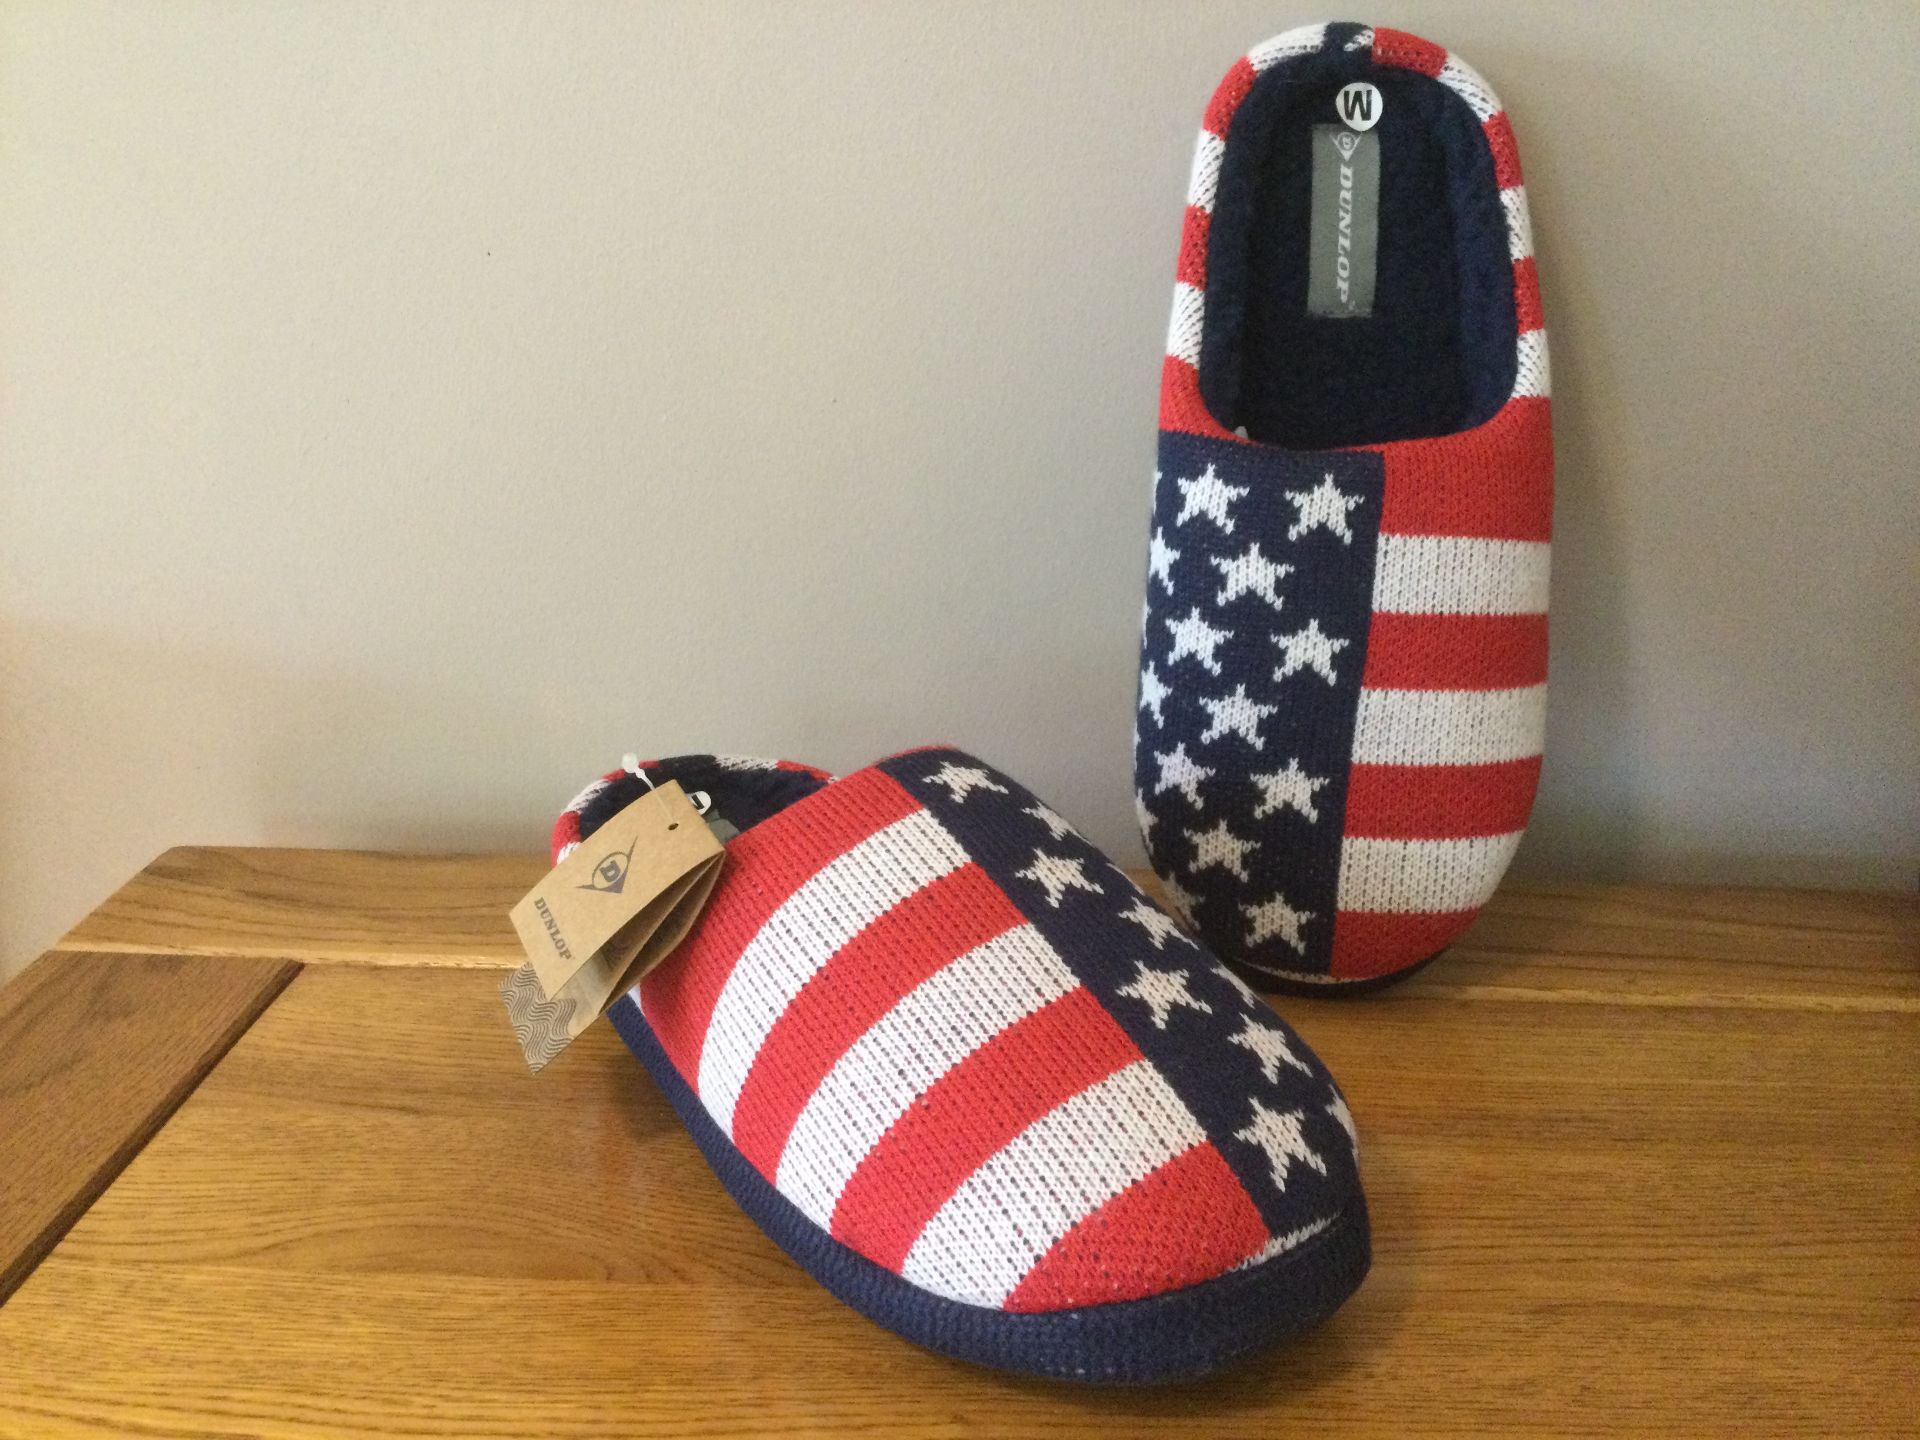 Job Lot 10 x Men's Dunlop, “USA Stars and Stripes” Memory Foam, Mule Slippers, Size M (8/9) - Image 3 of 7